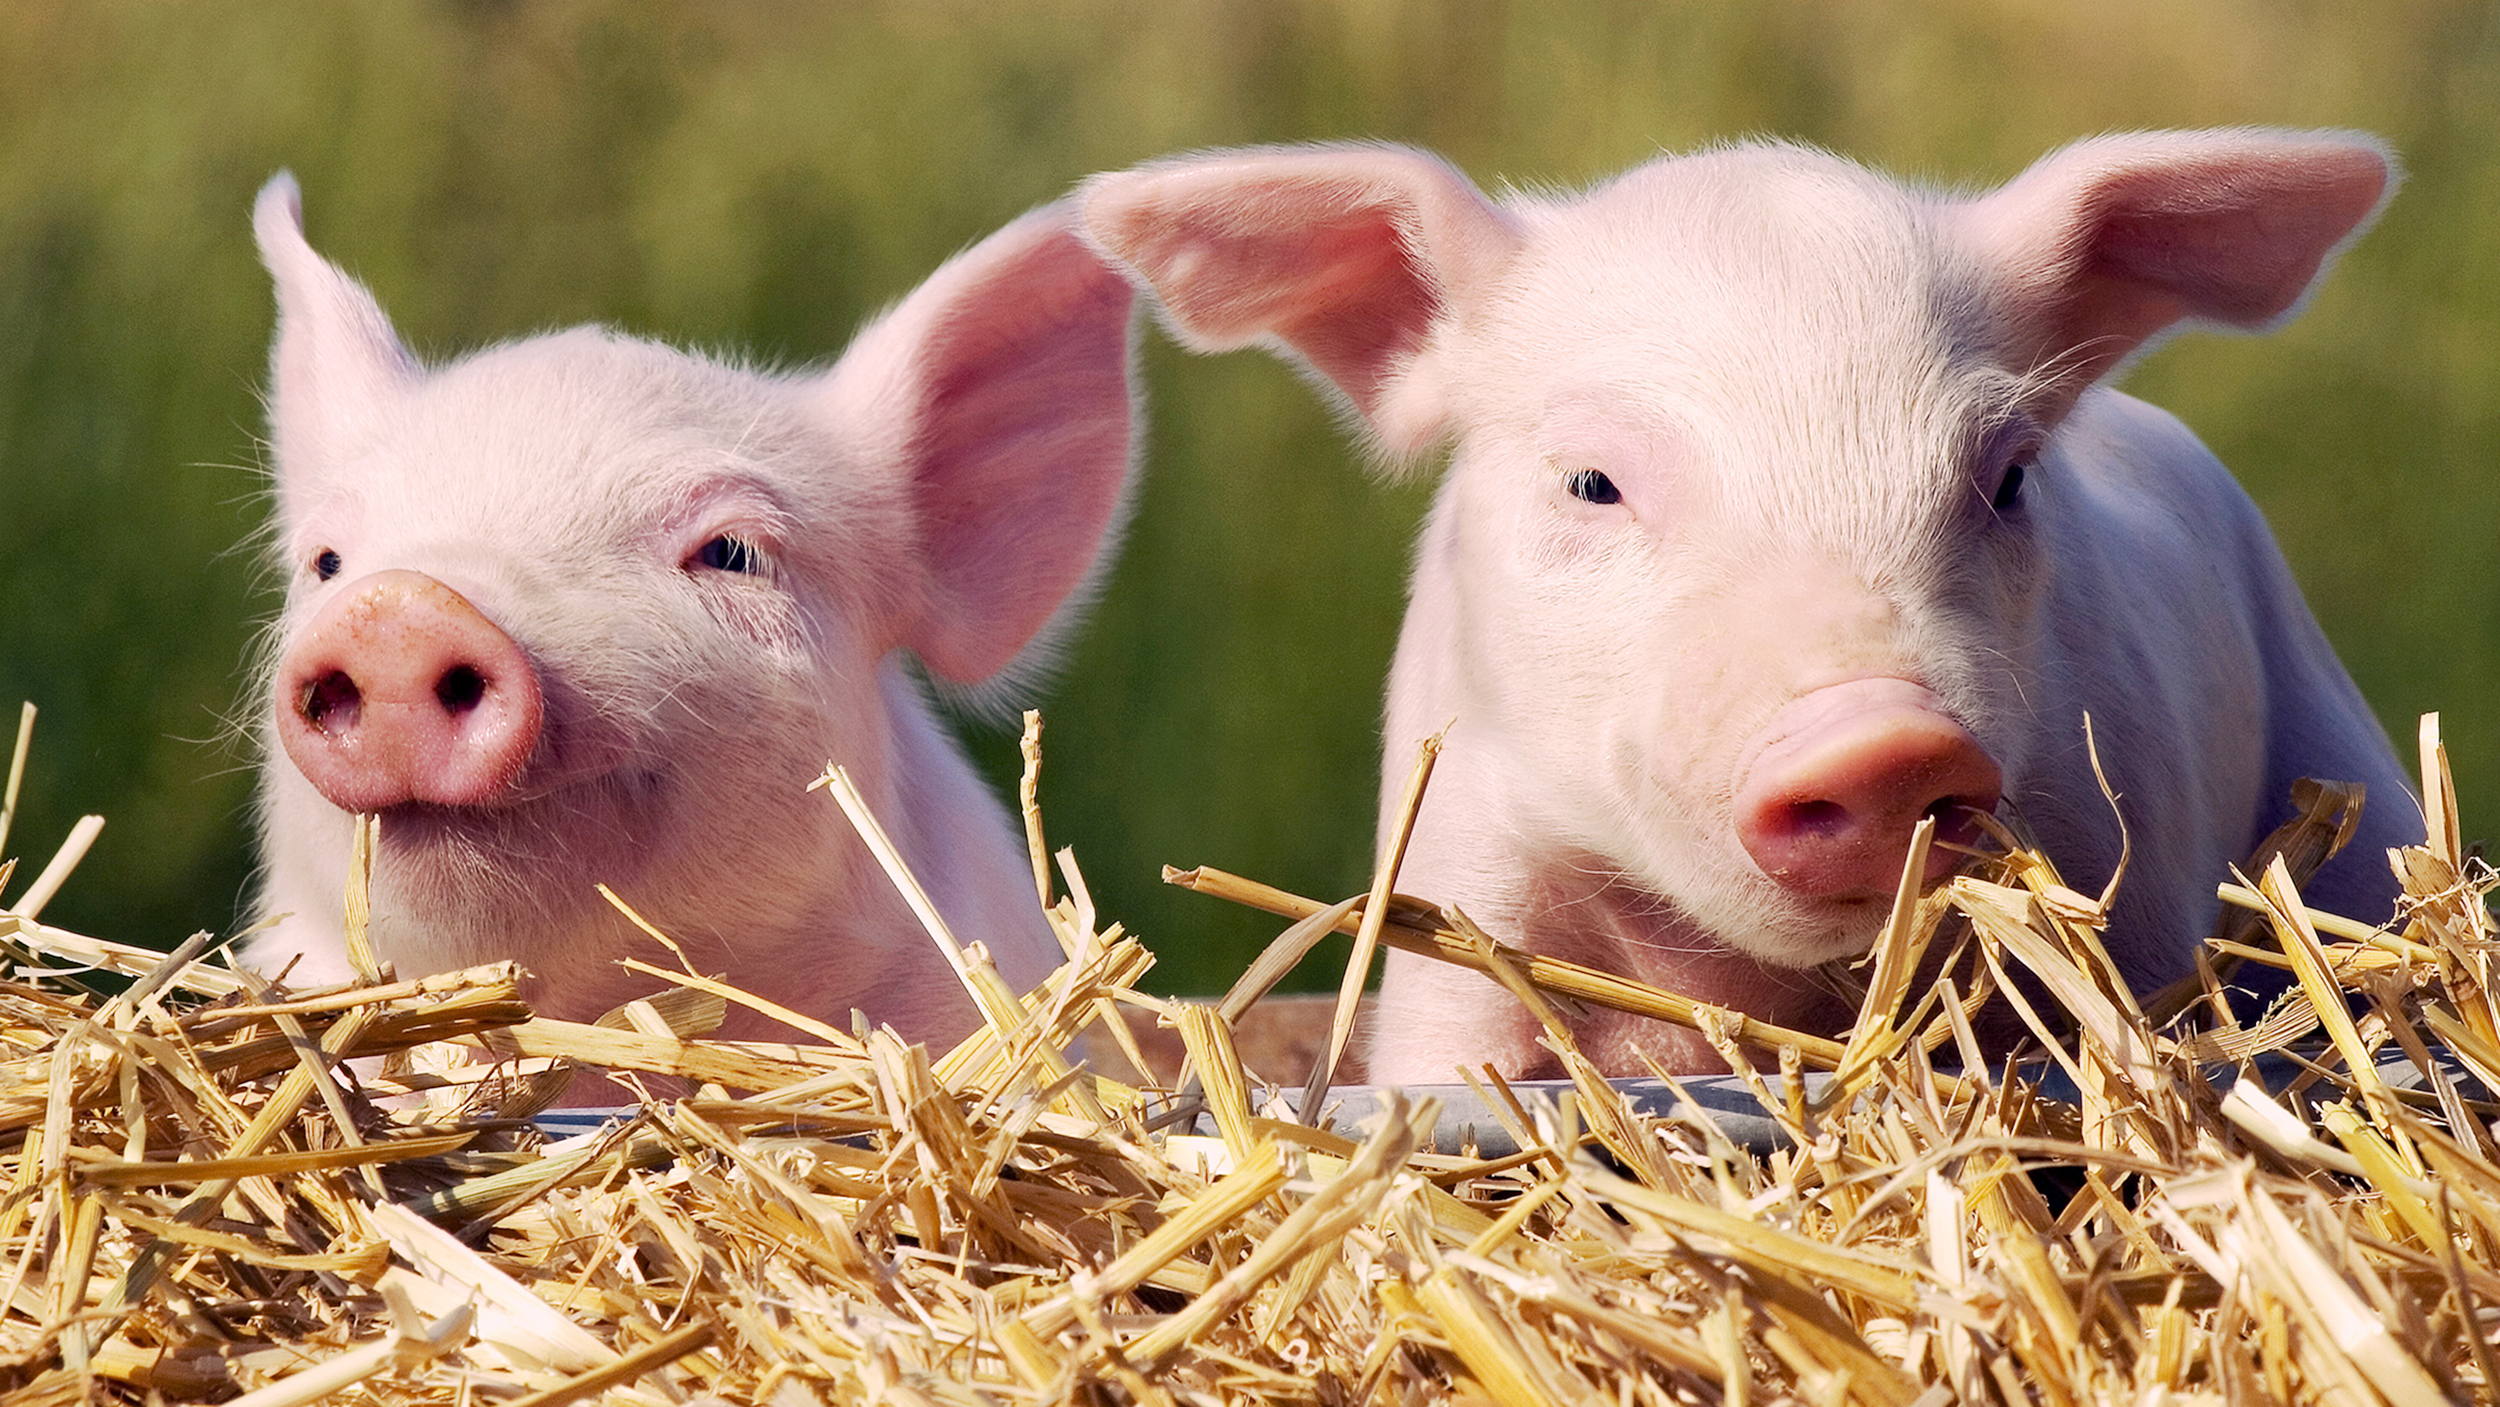 Piglets saved from fire served as sausages to firefighters - TODAY.com